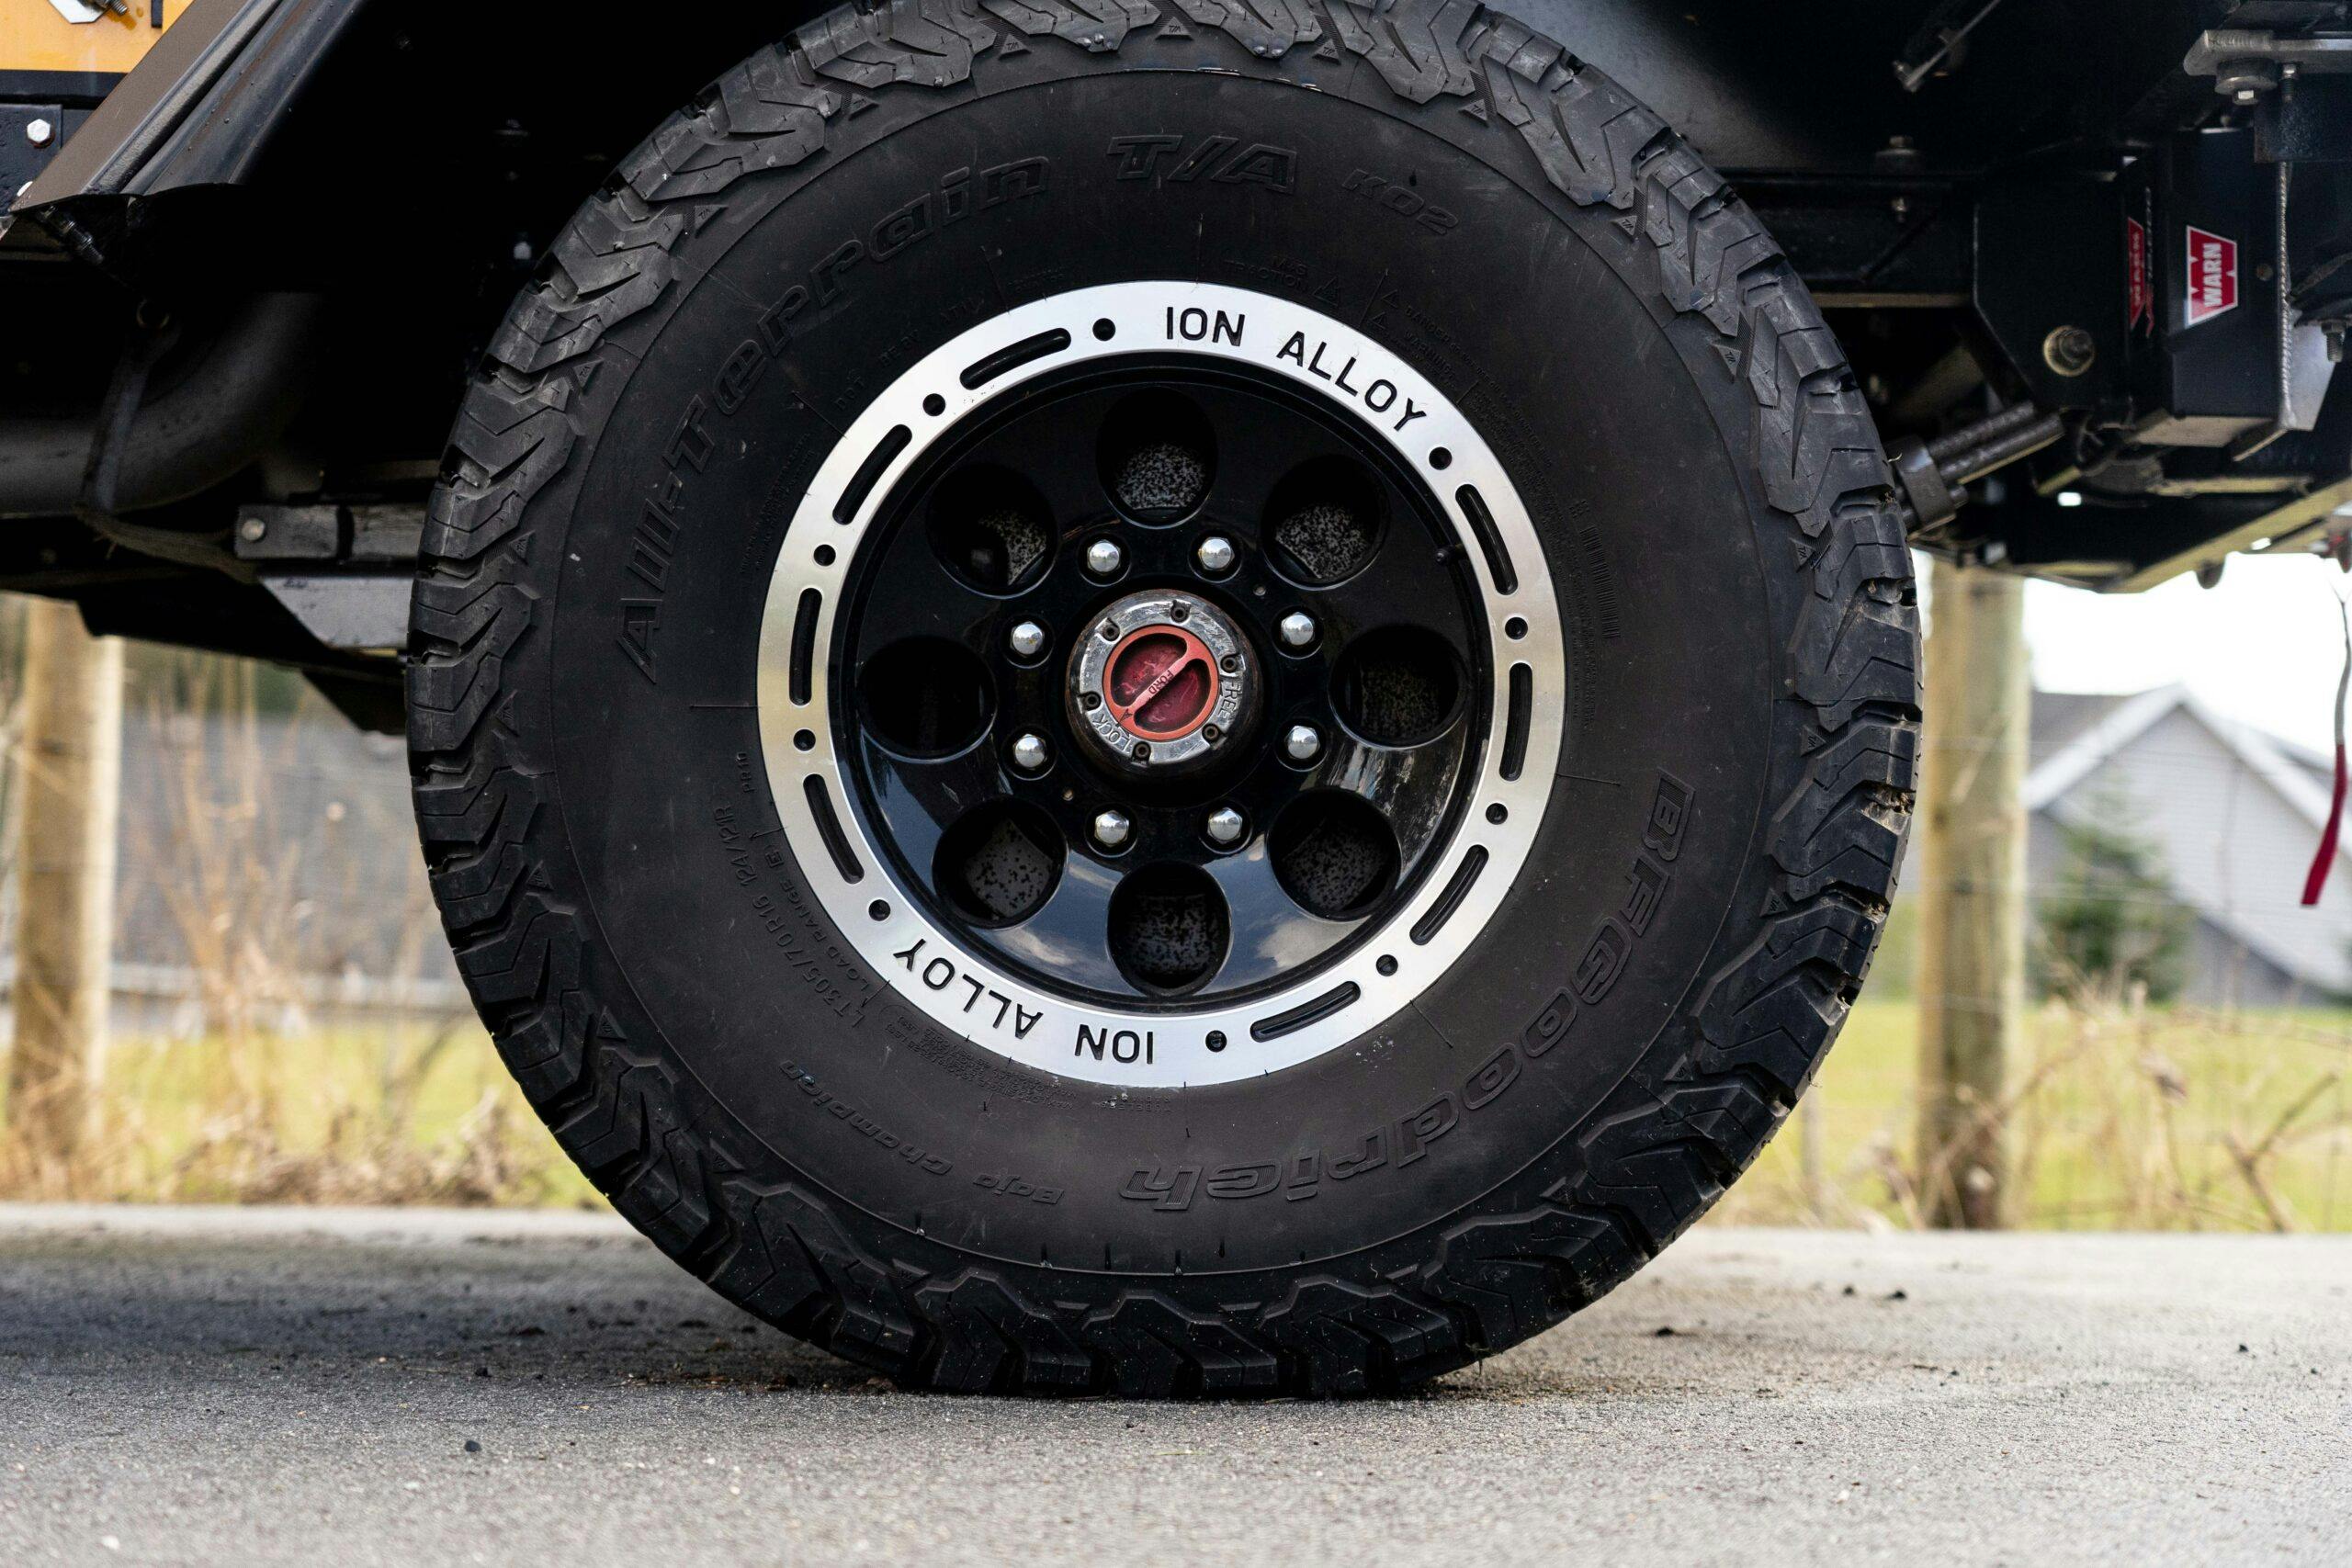 Grizzly Truck wheel tire